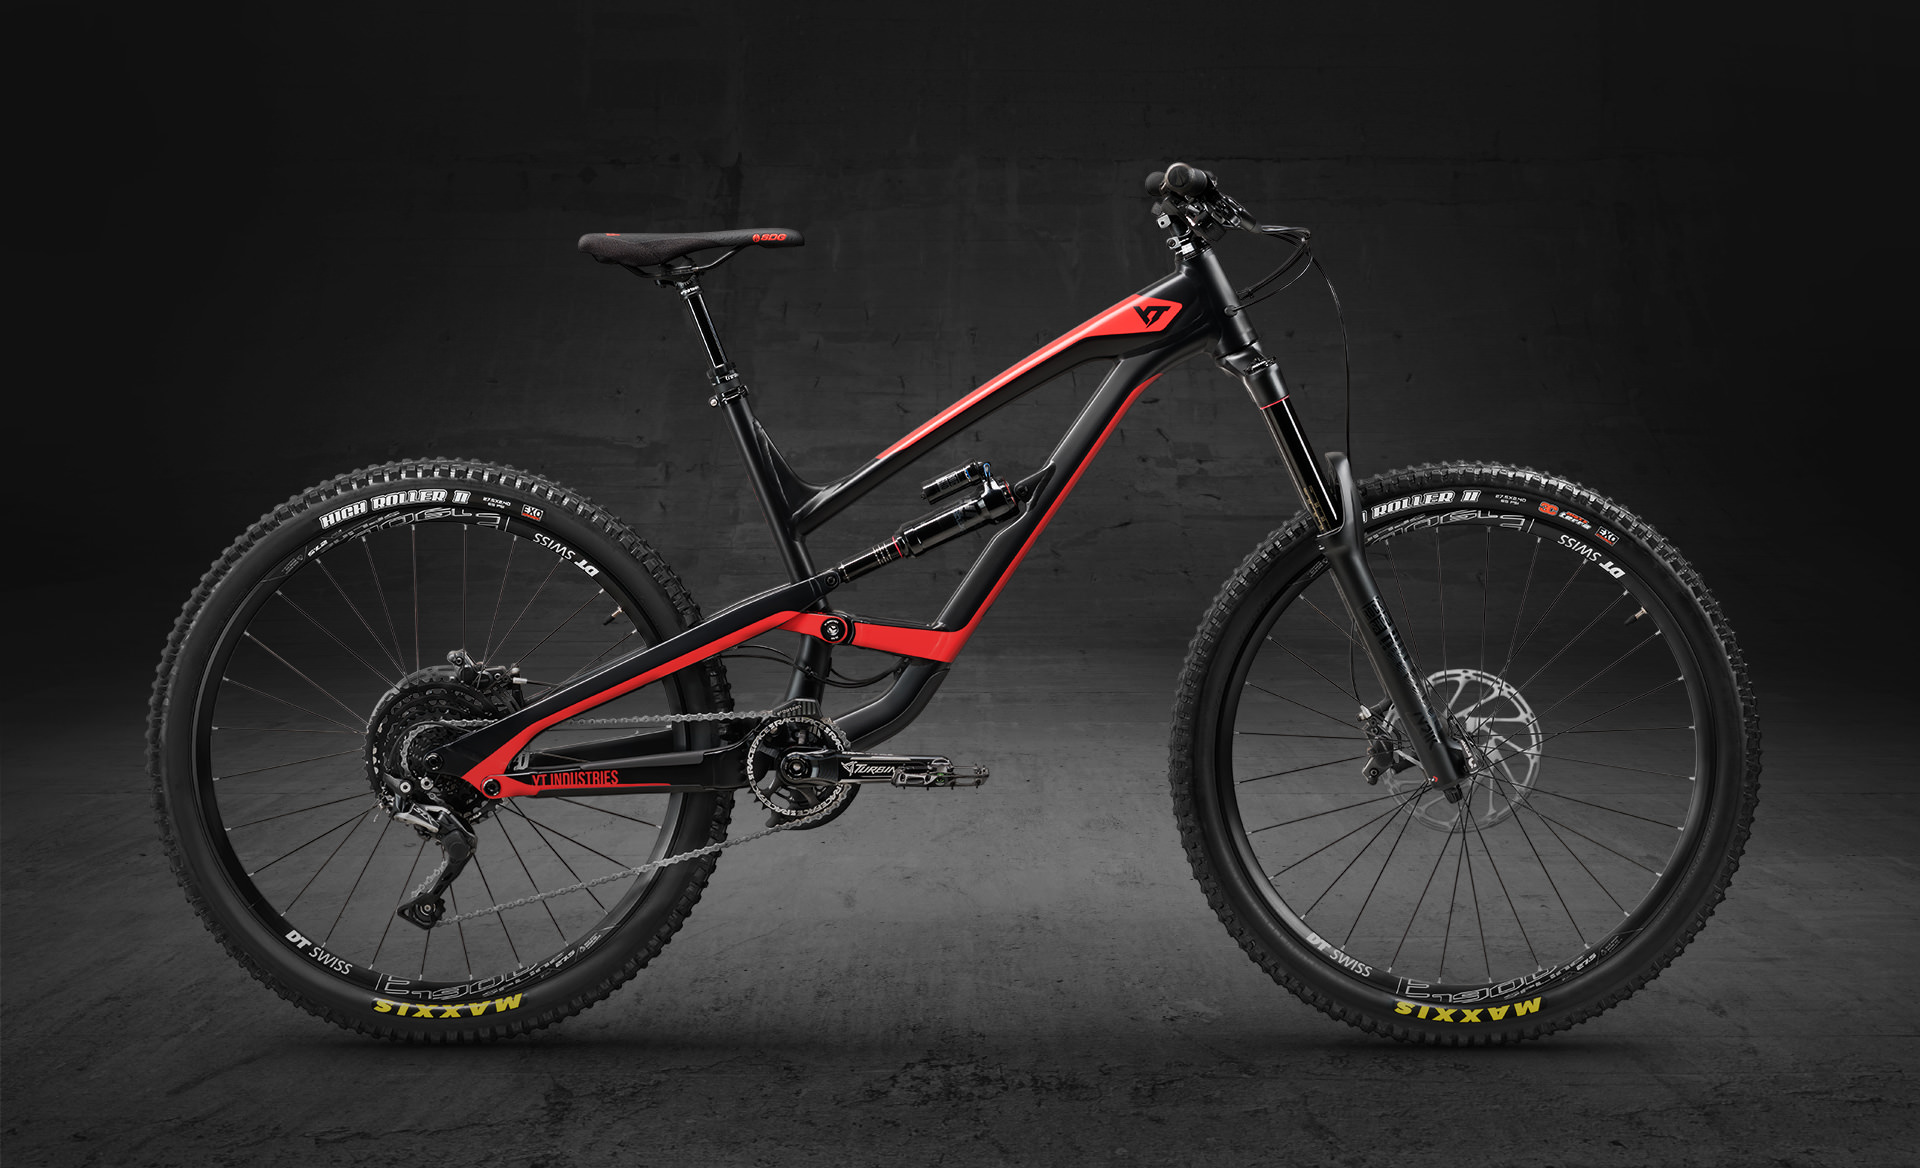 The New 2018 YT Capra is Launched, IMB